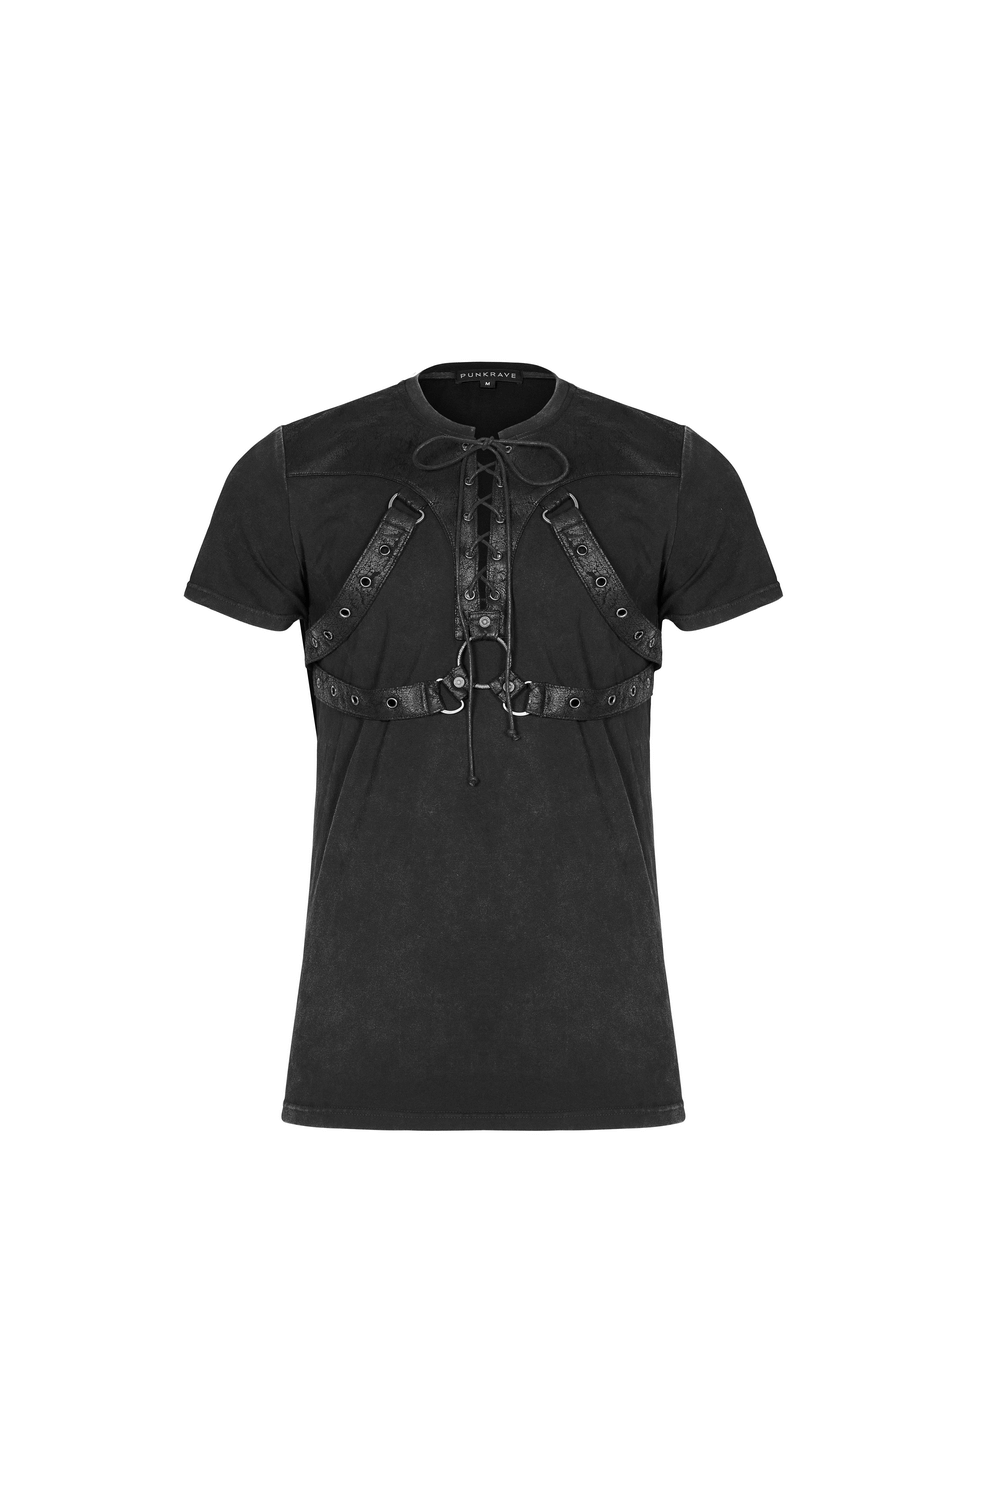 Edgy Punk Rock T-Shirt with Leather and Rope Details